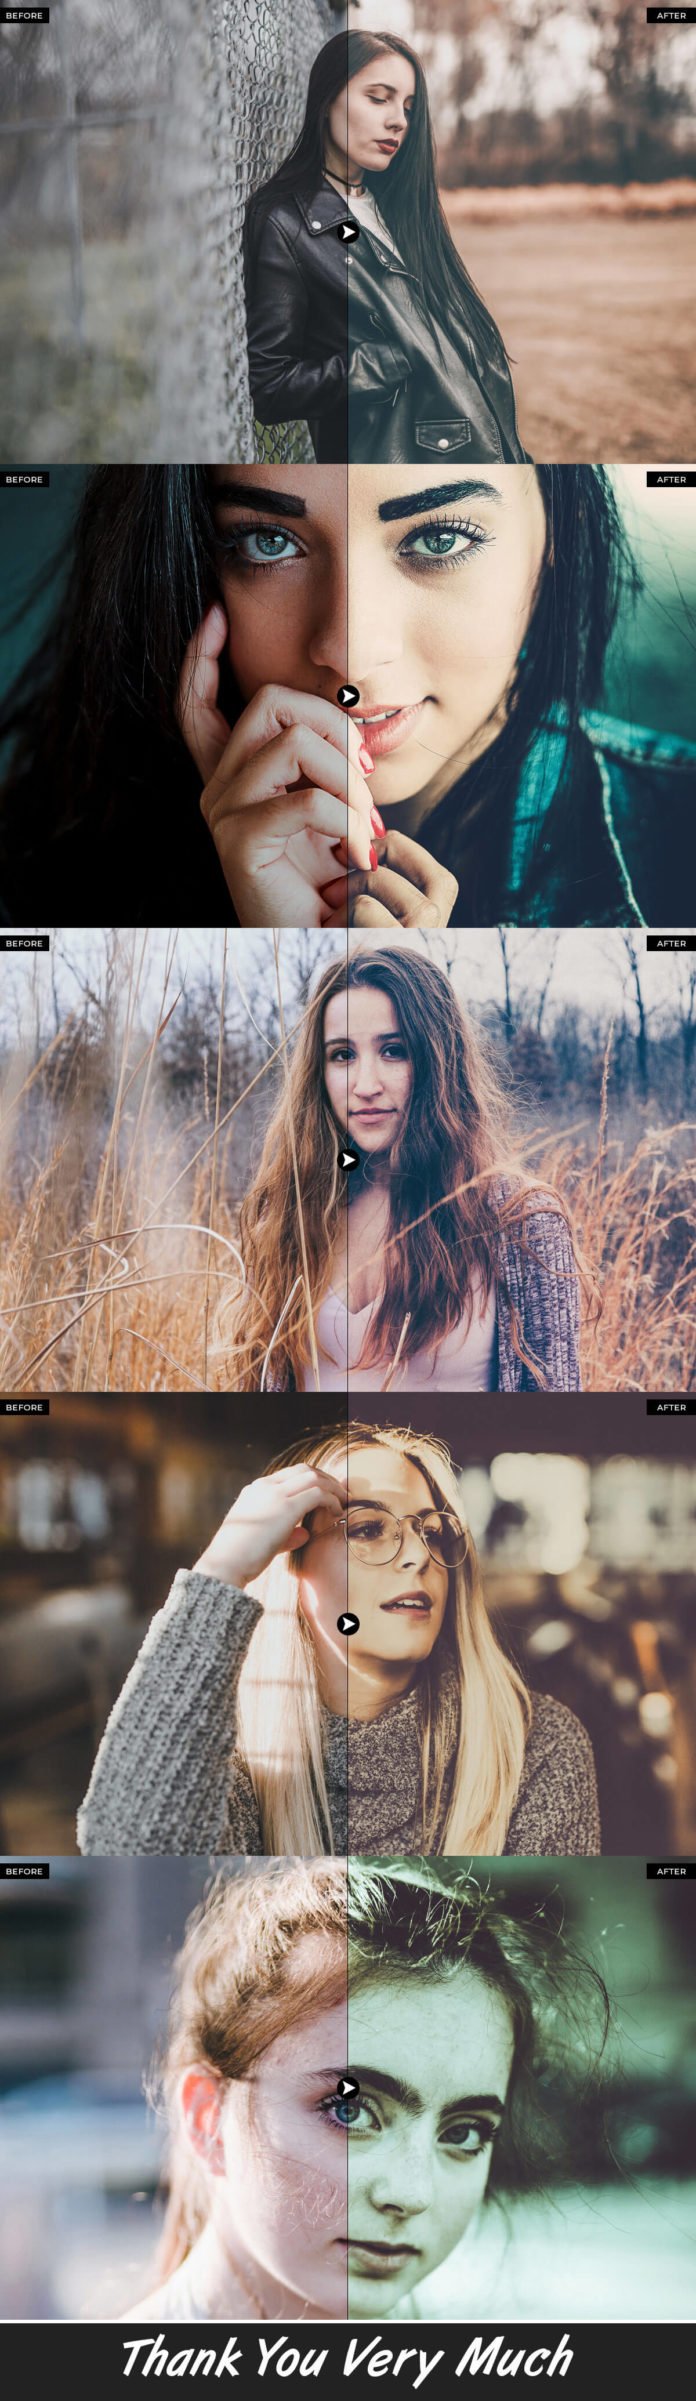 Lifestyle Photoshop Actions Free Download - Creativetacos